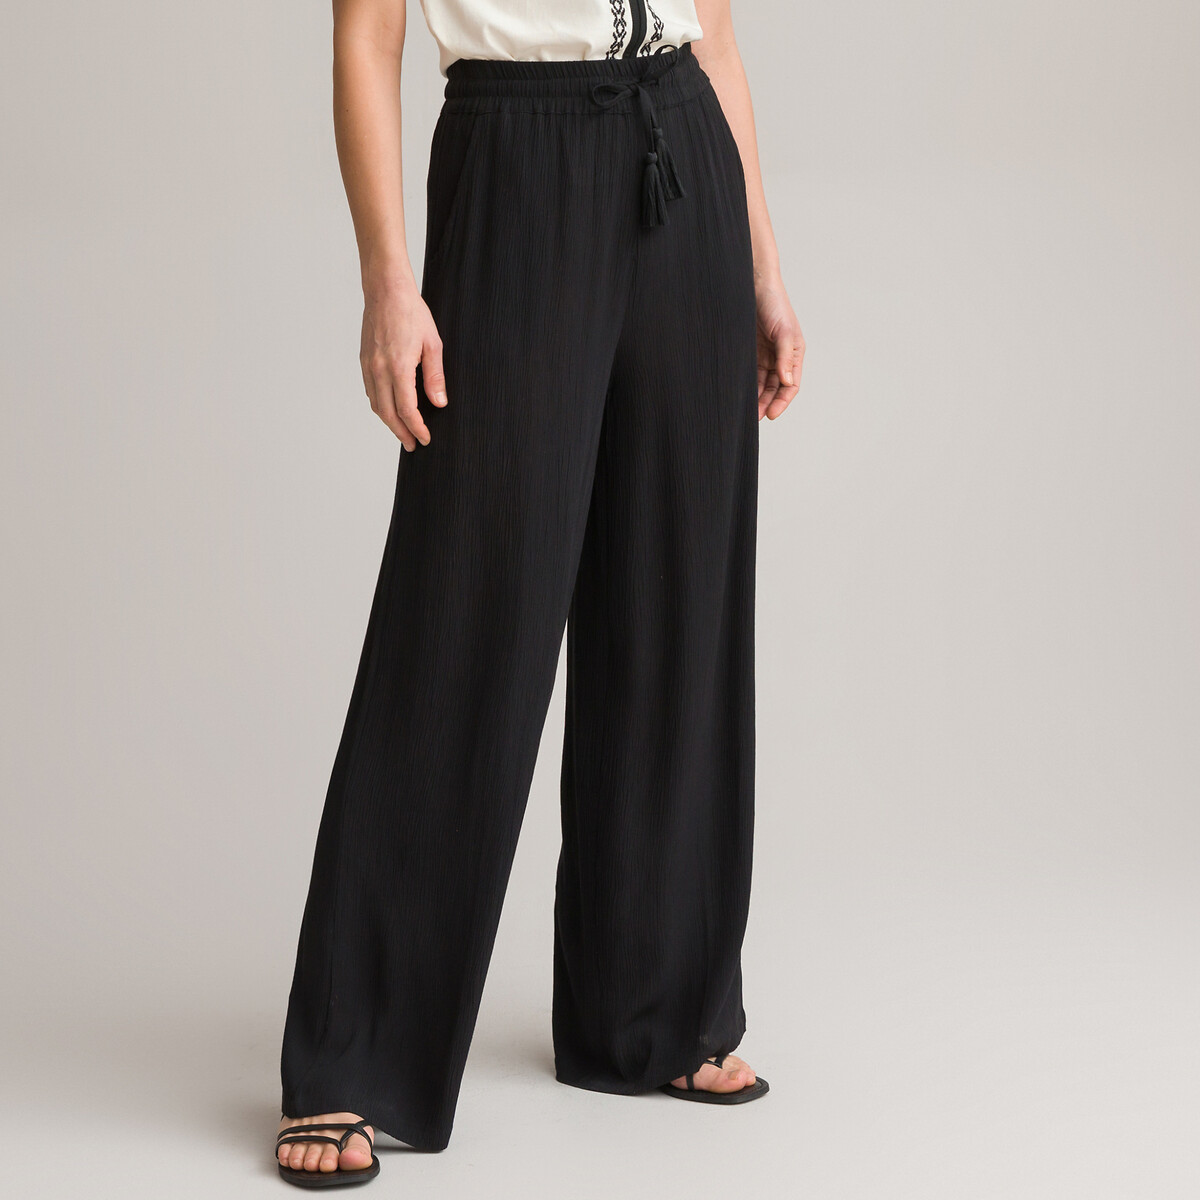 Crepon Wide Leg Trousers, Length 30.5"